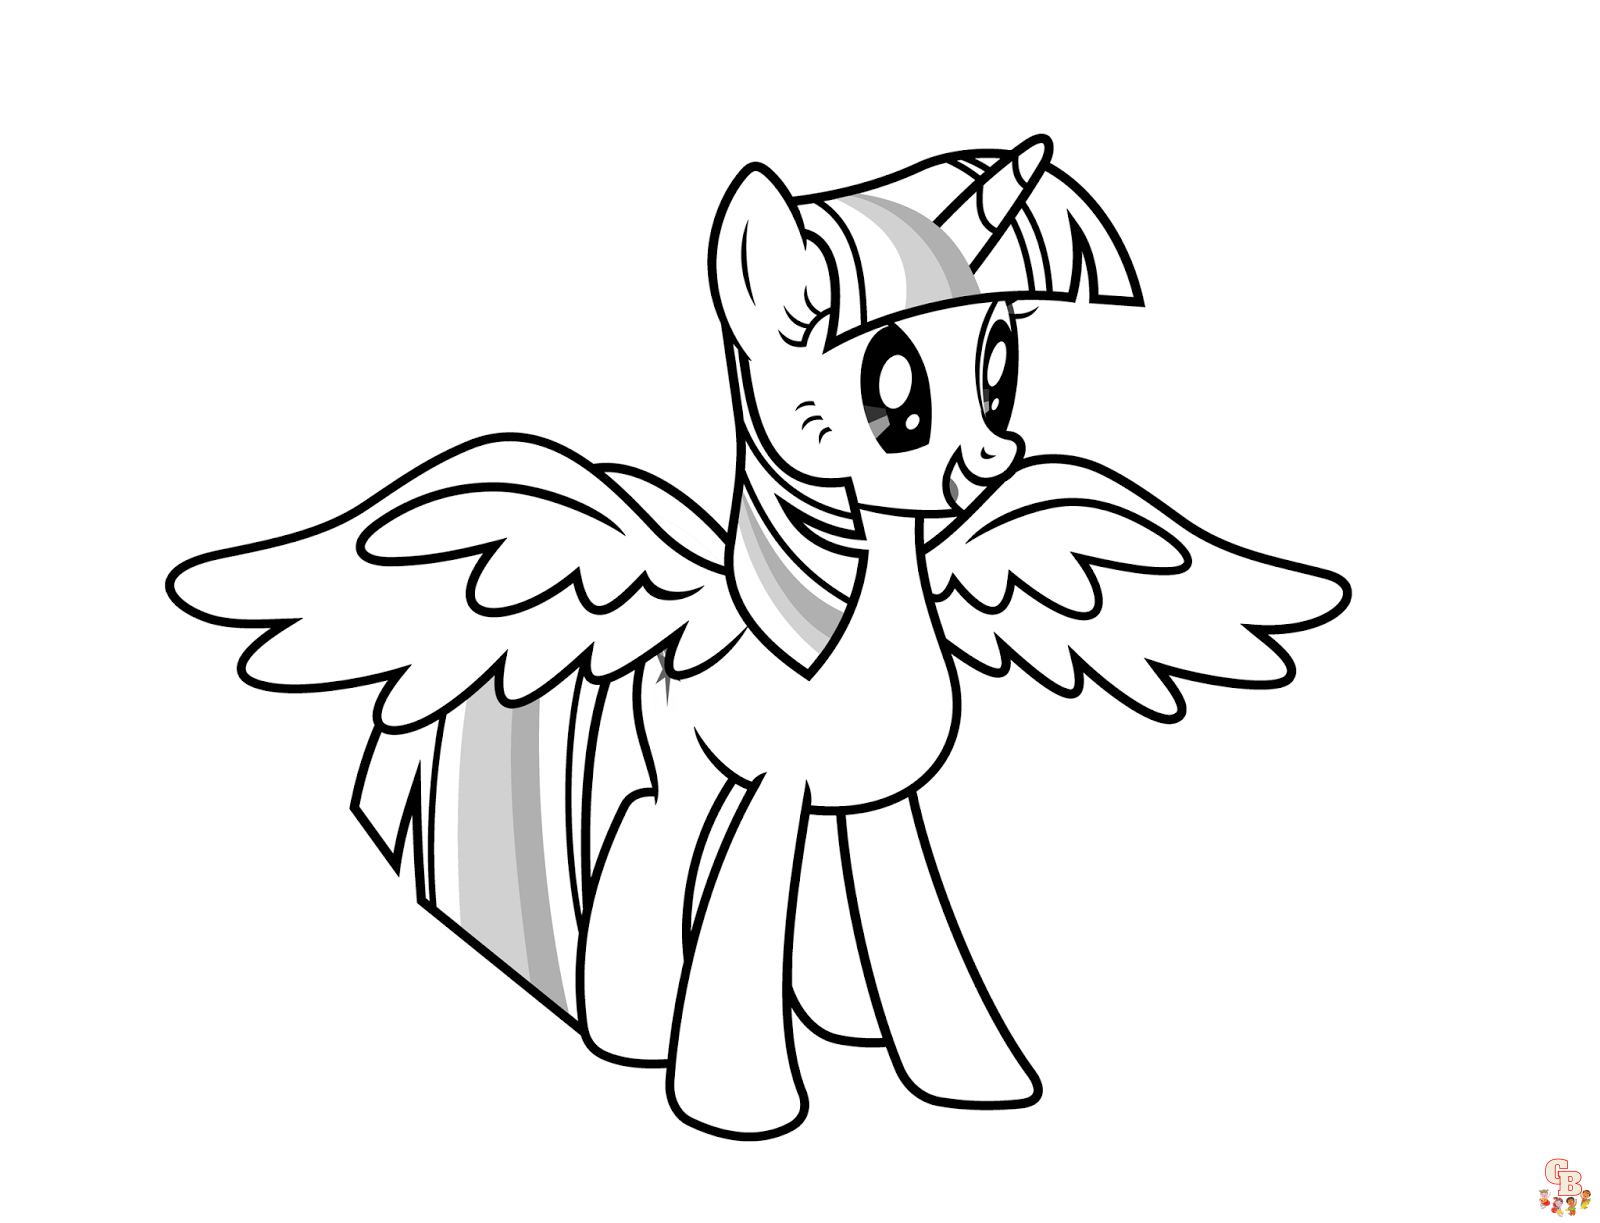 Cute Twilight Sparkle coloring pages free